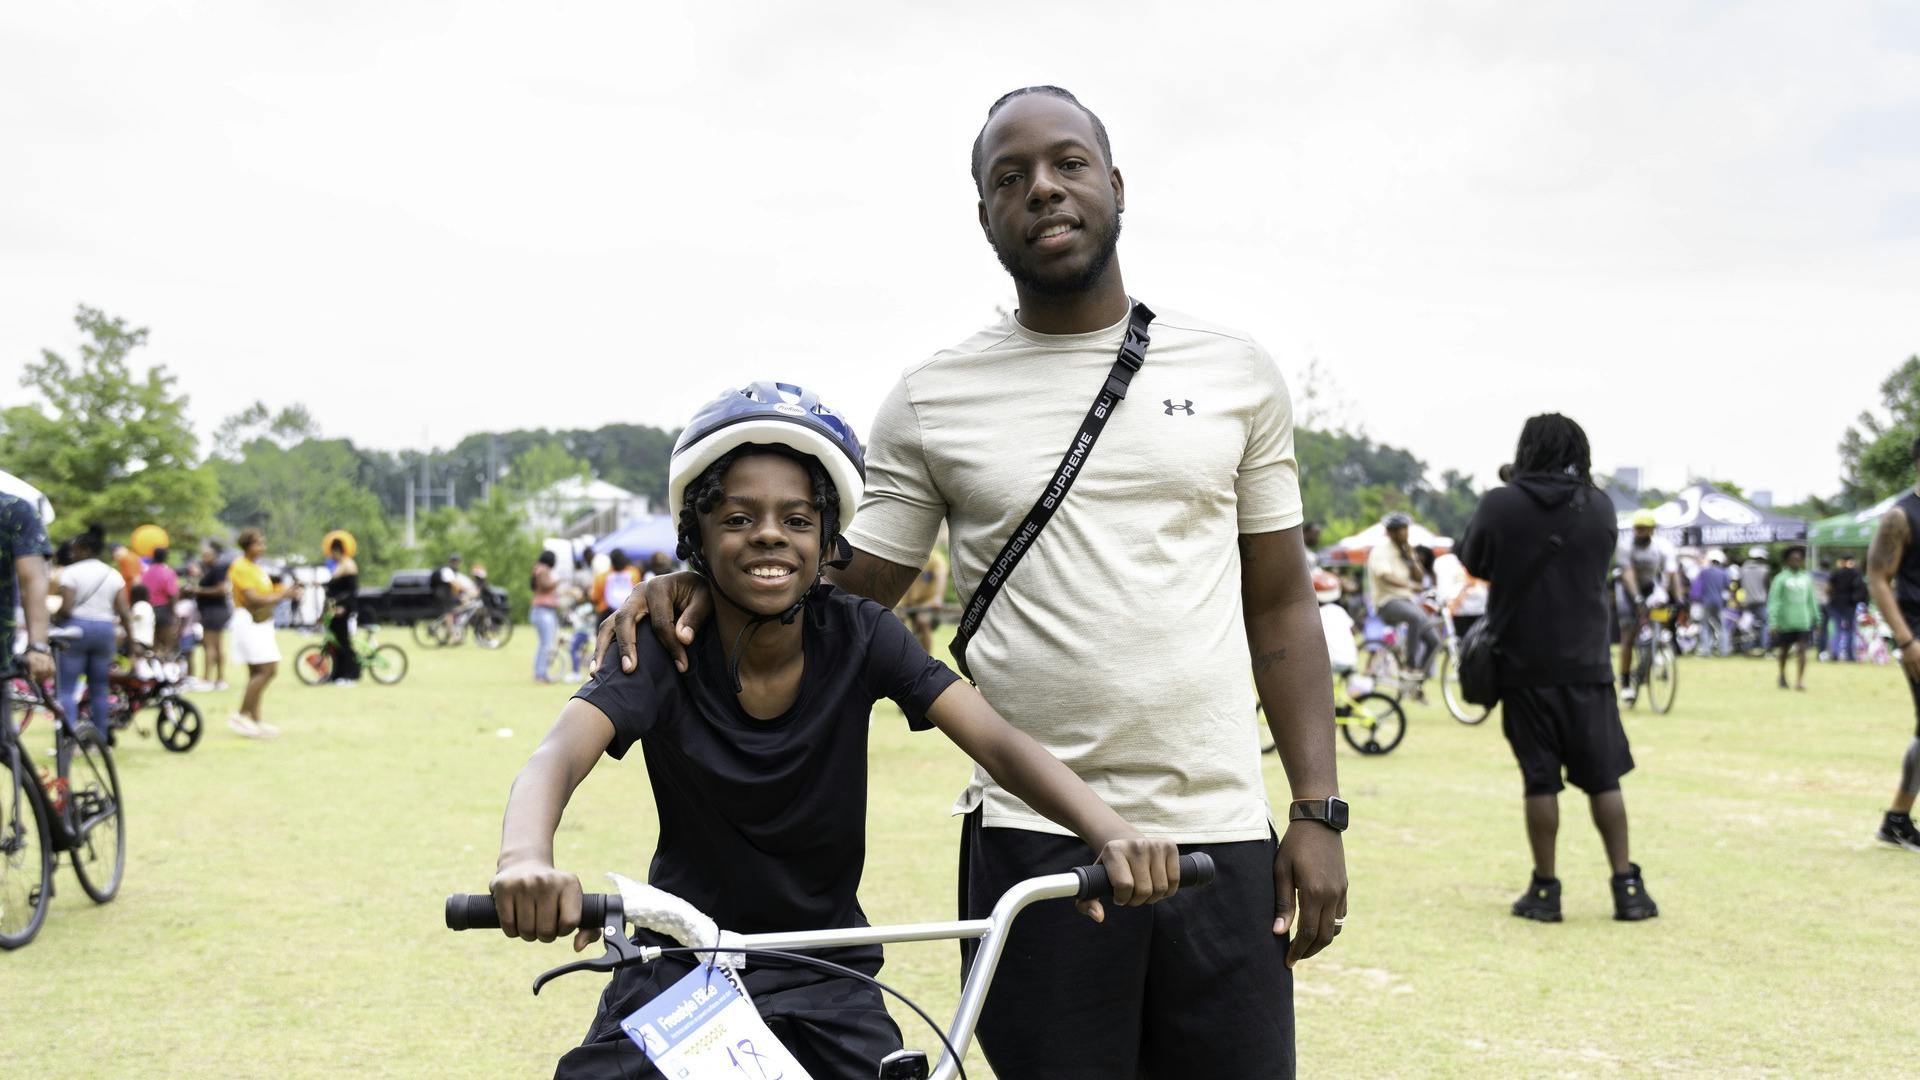 A kid sits on his bike, smiling, with a man smiling next to him.